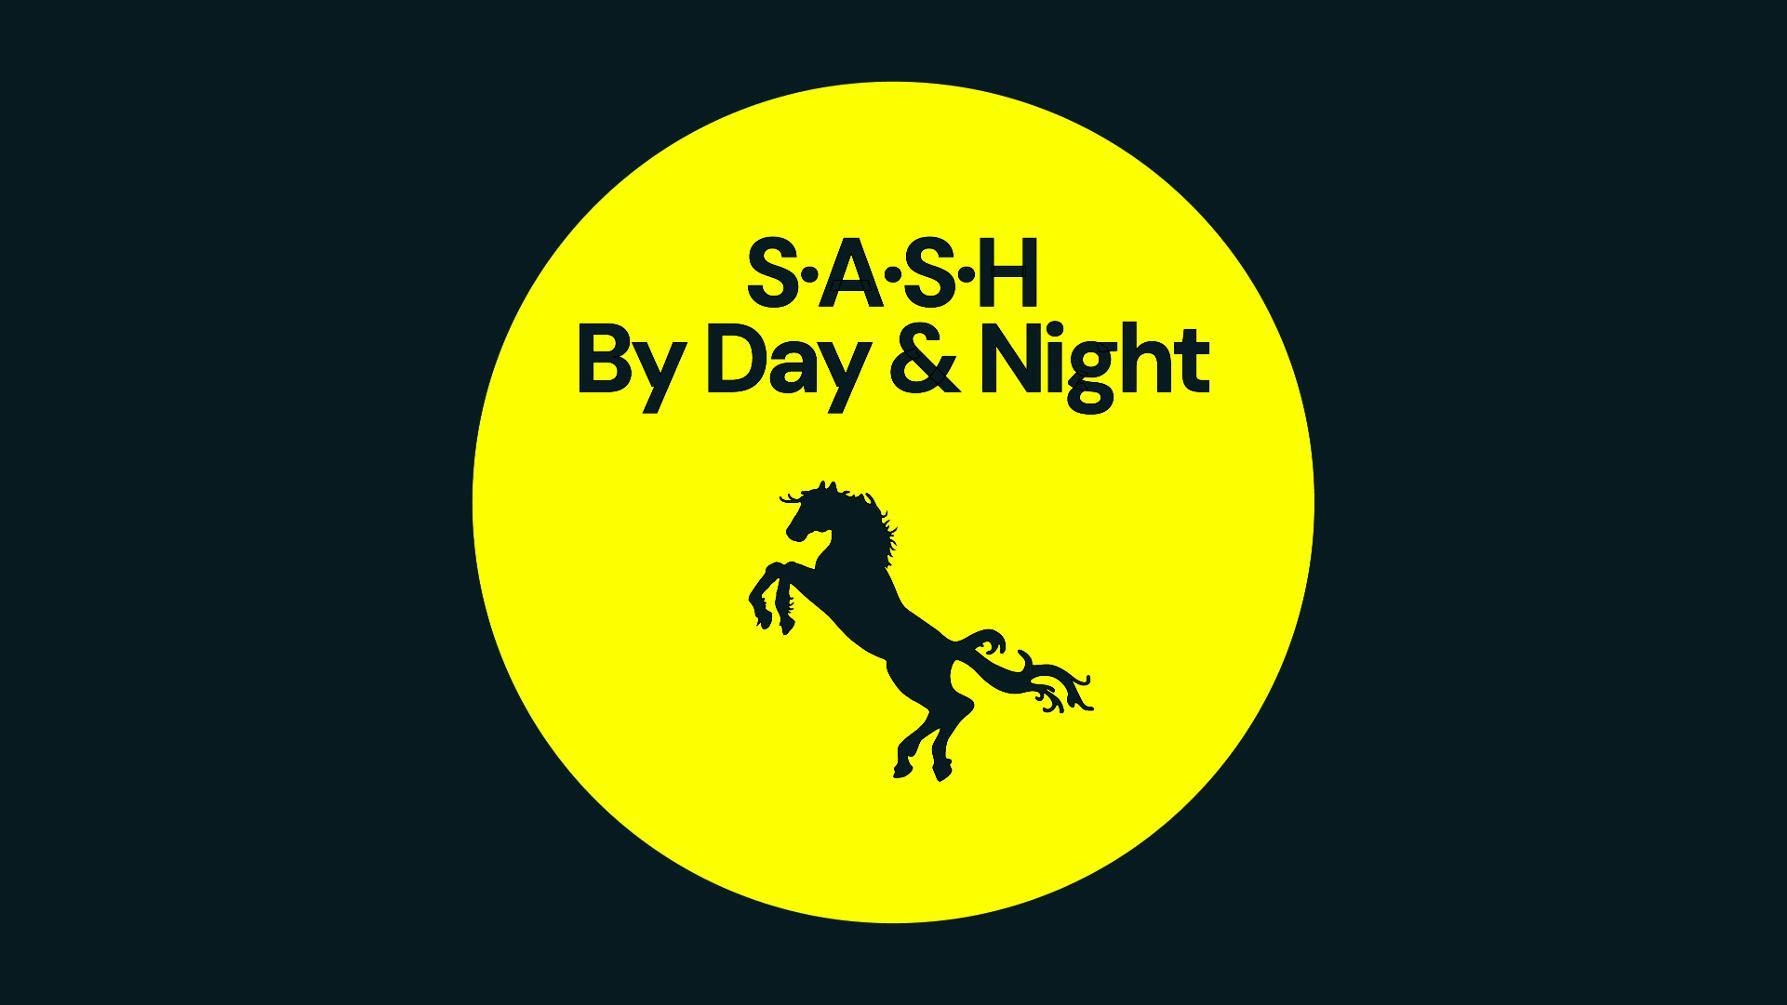 ★ S.A.S.H By Day & Night ★ Sunday 16th June ★